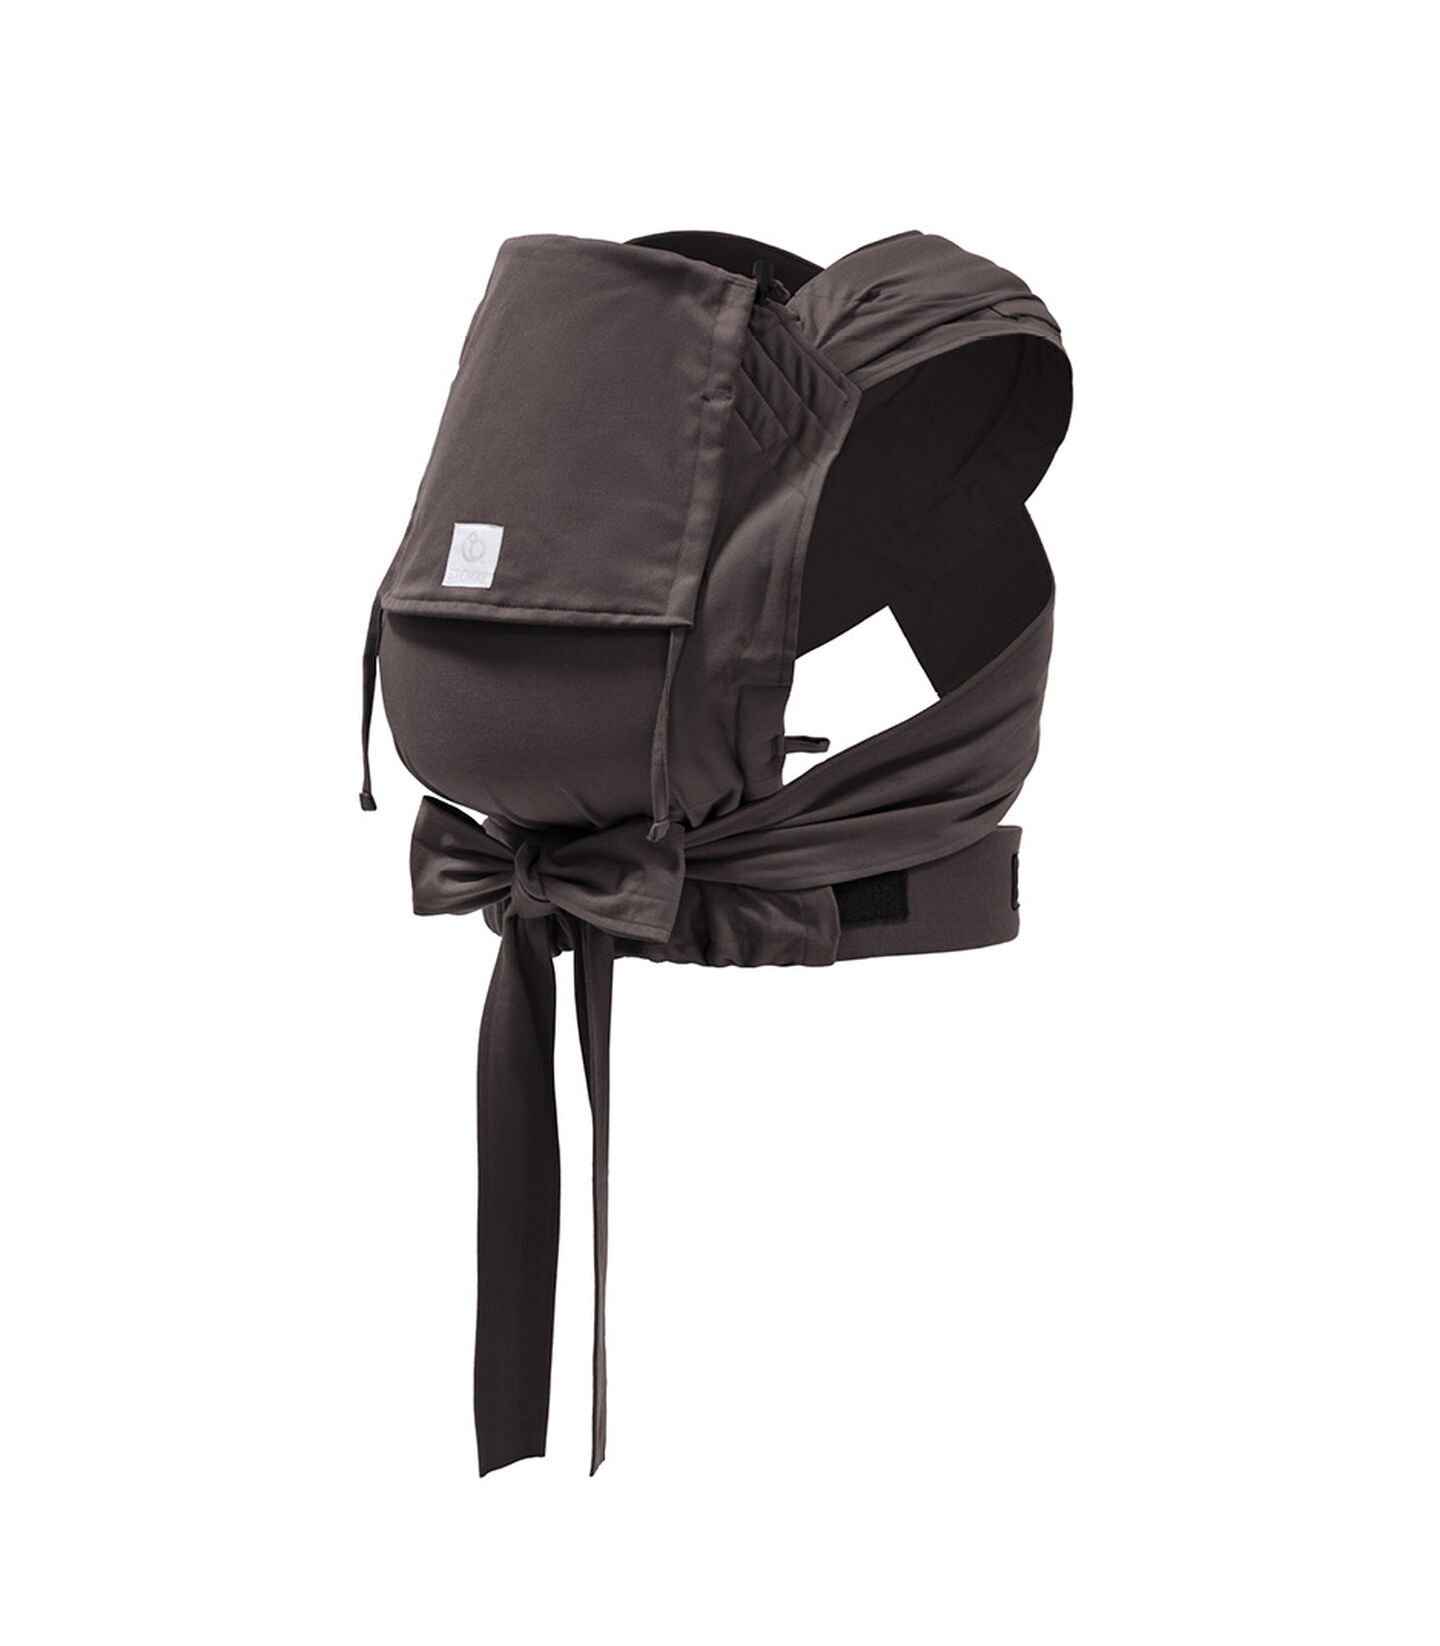 Stokke® Limas™ babydrager Dark Anthracite, Espresso Brown, mainview view 1